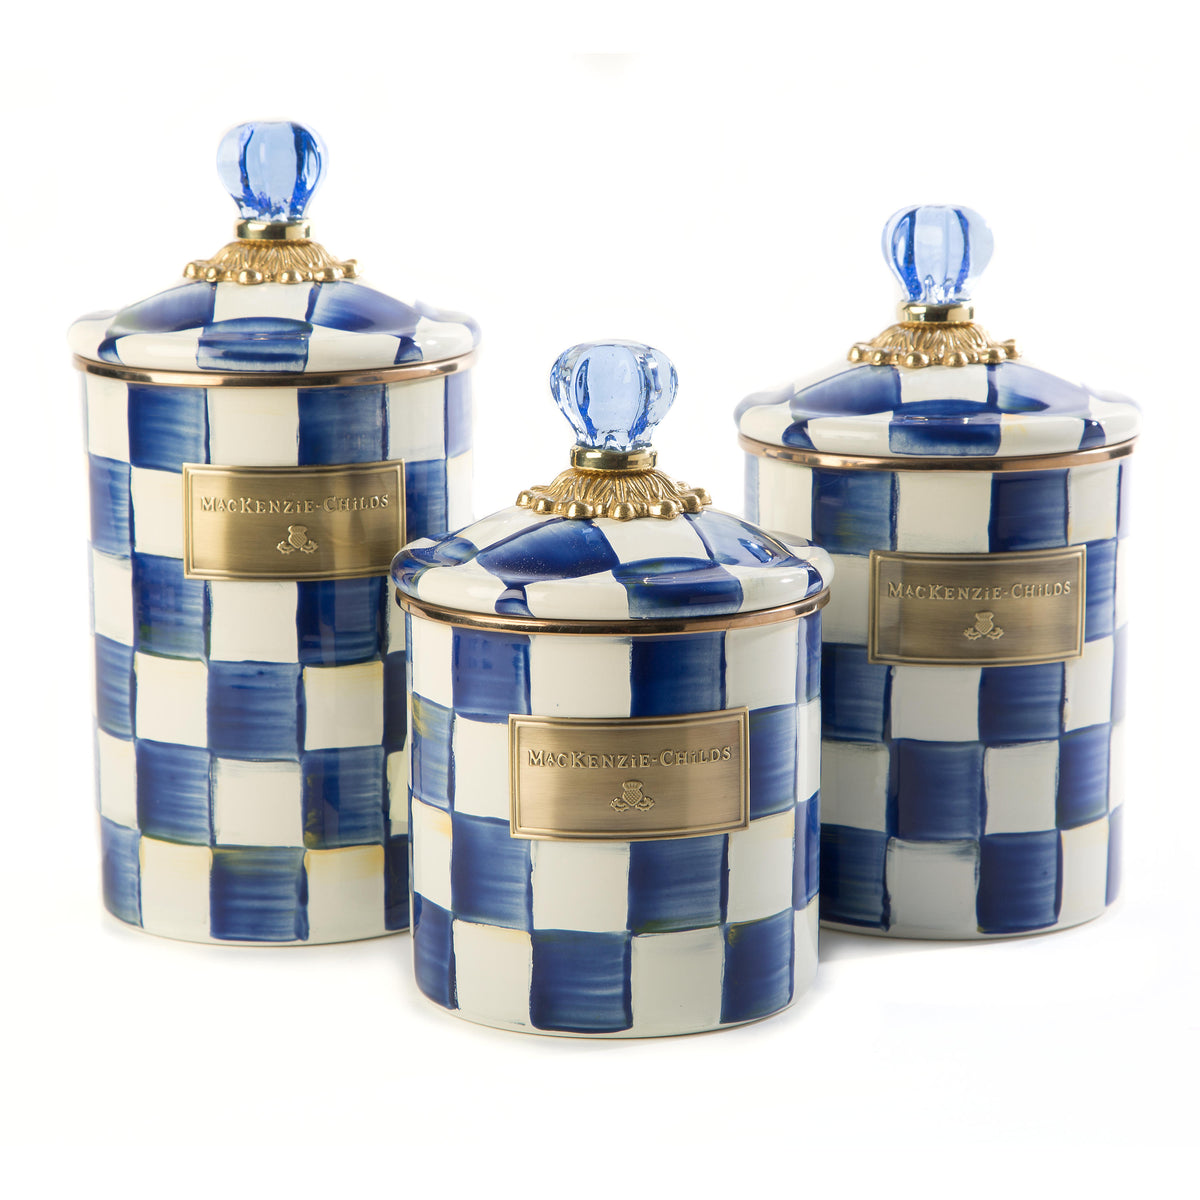 Royal Check Canister - Large